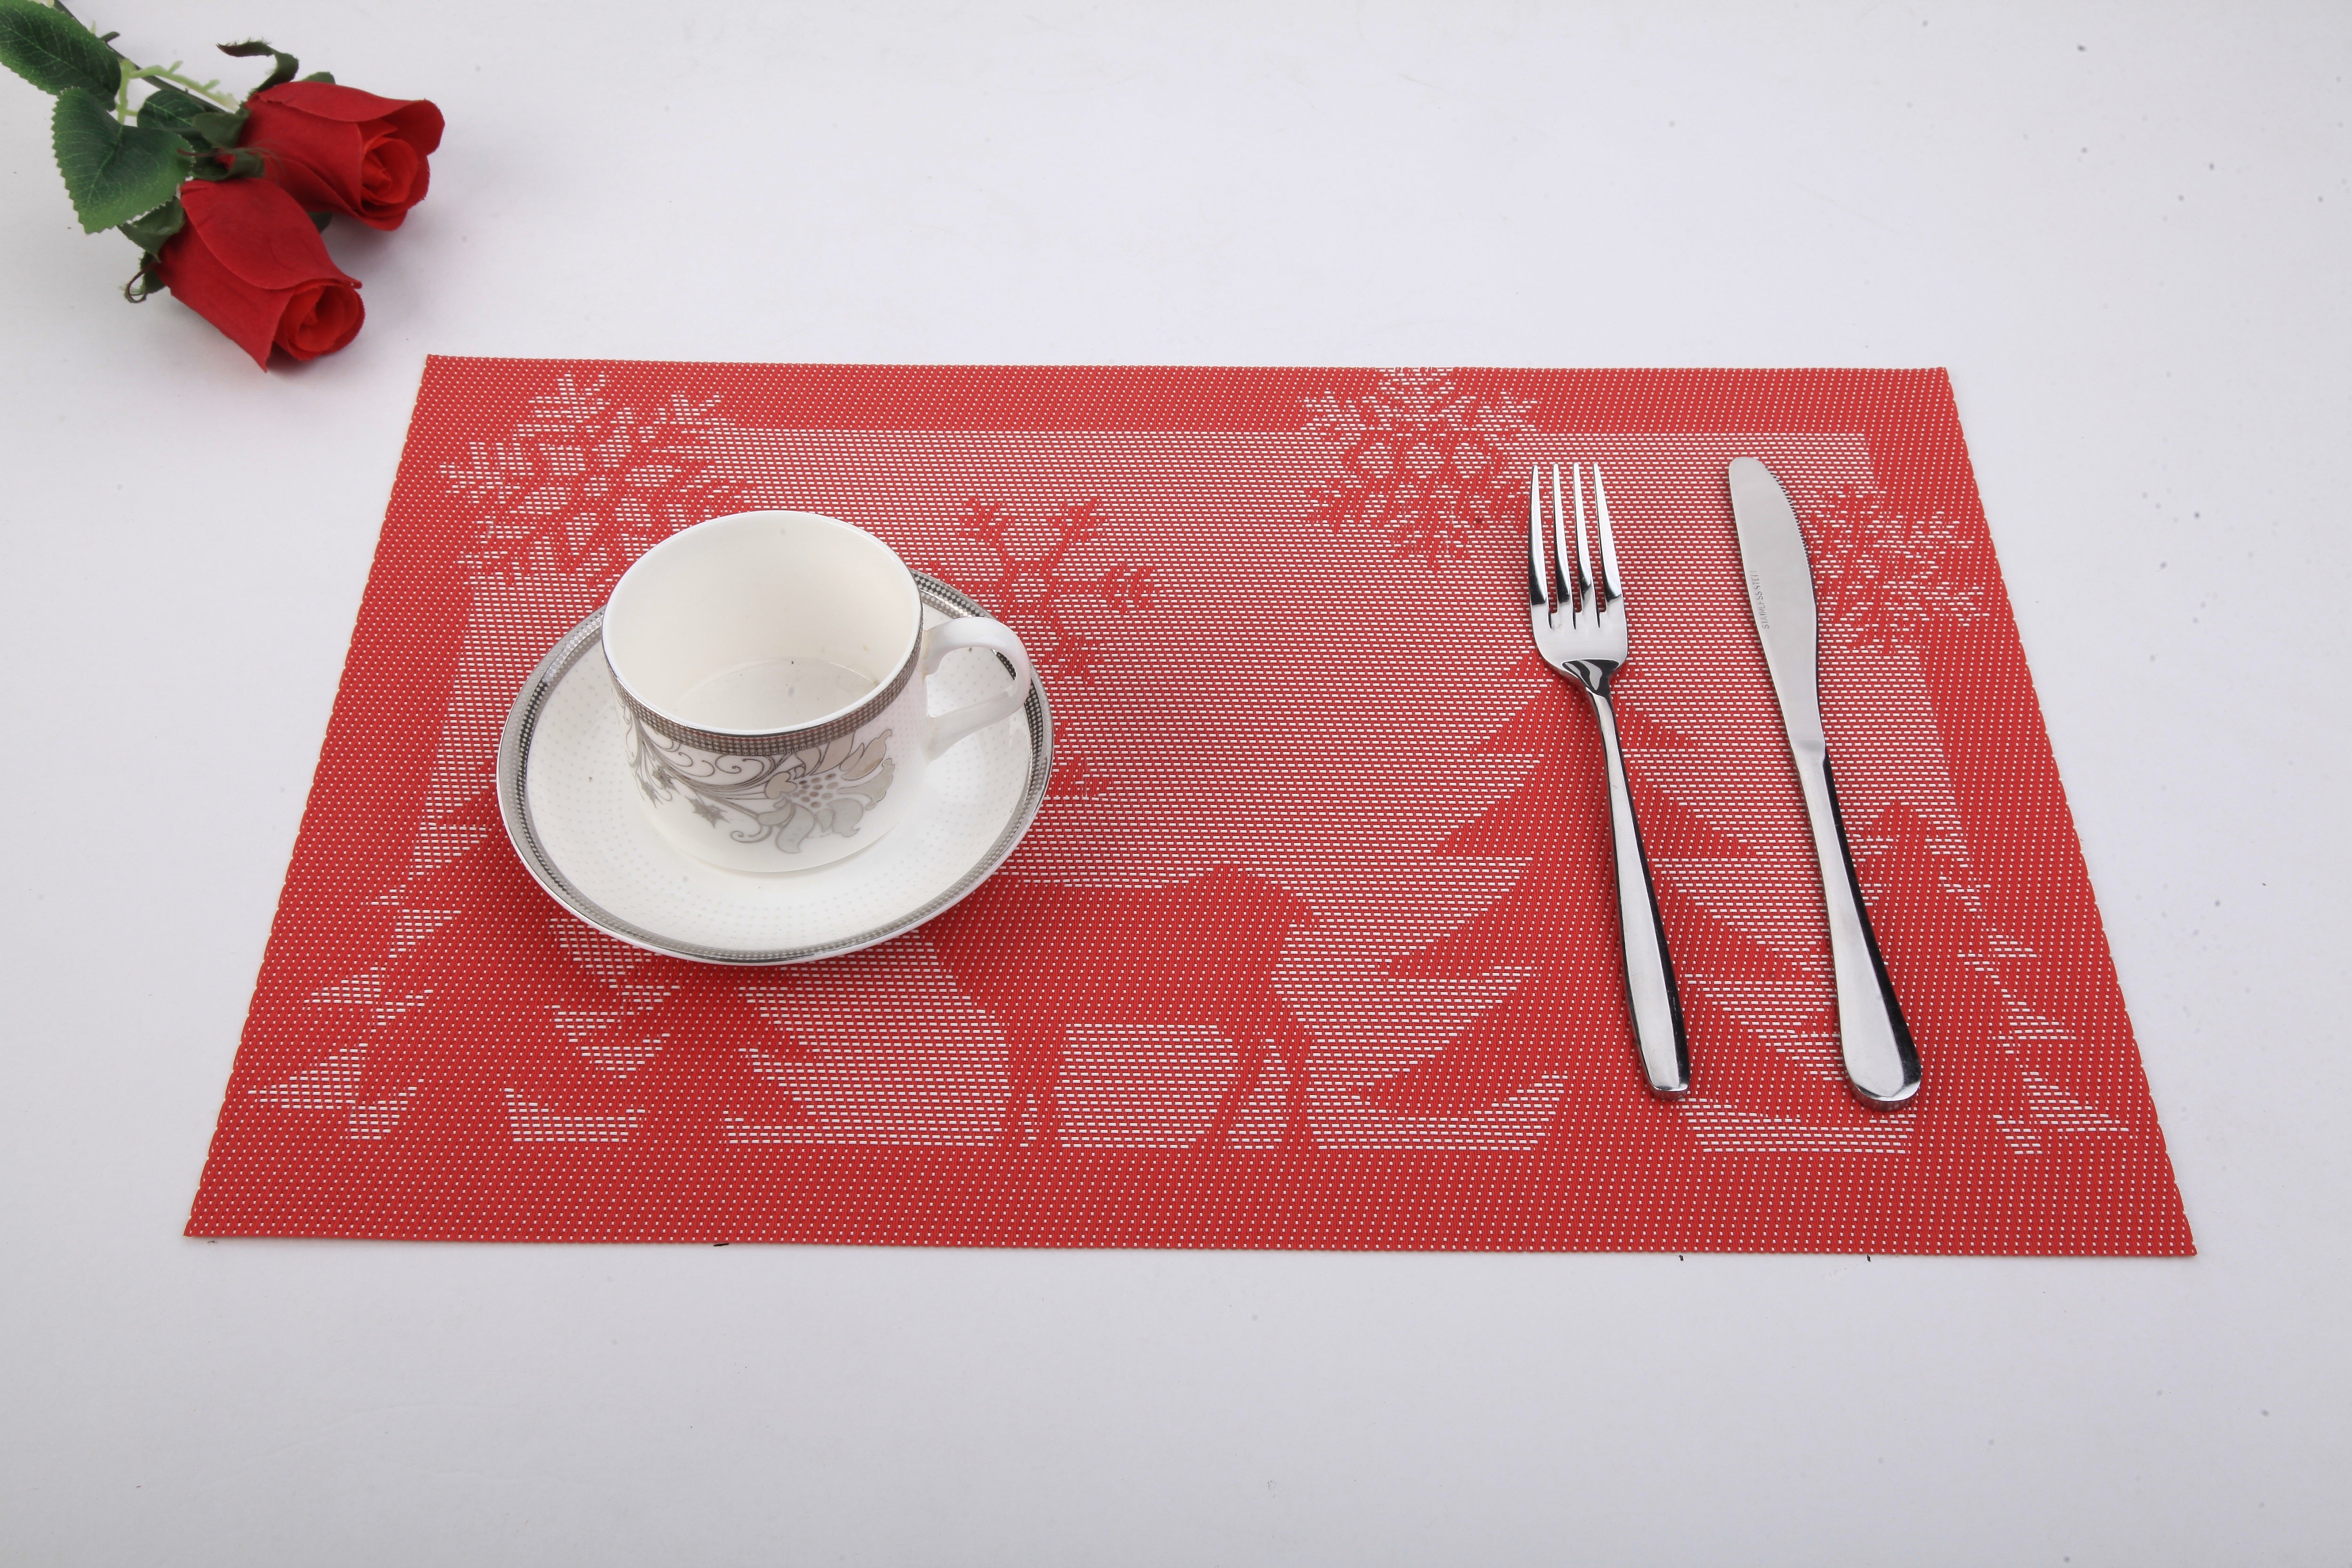 Red & White Deer Jacquard 12" x 18" In. Woven Non-Slip Washable Placemat Set of 4